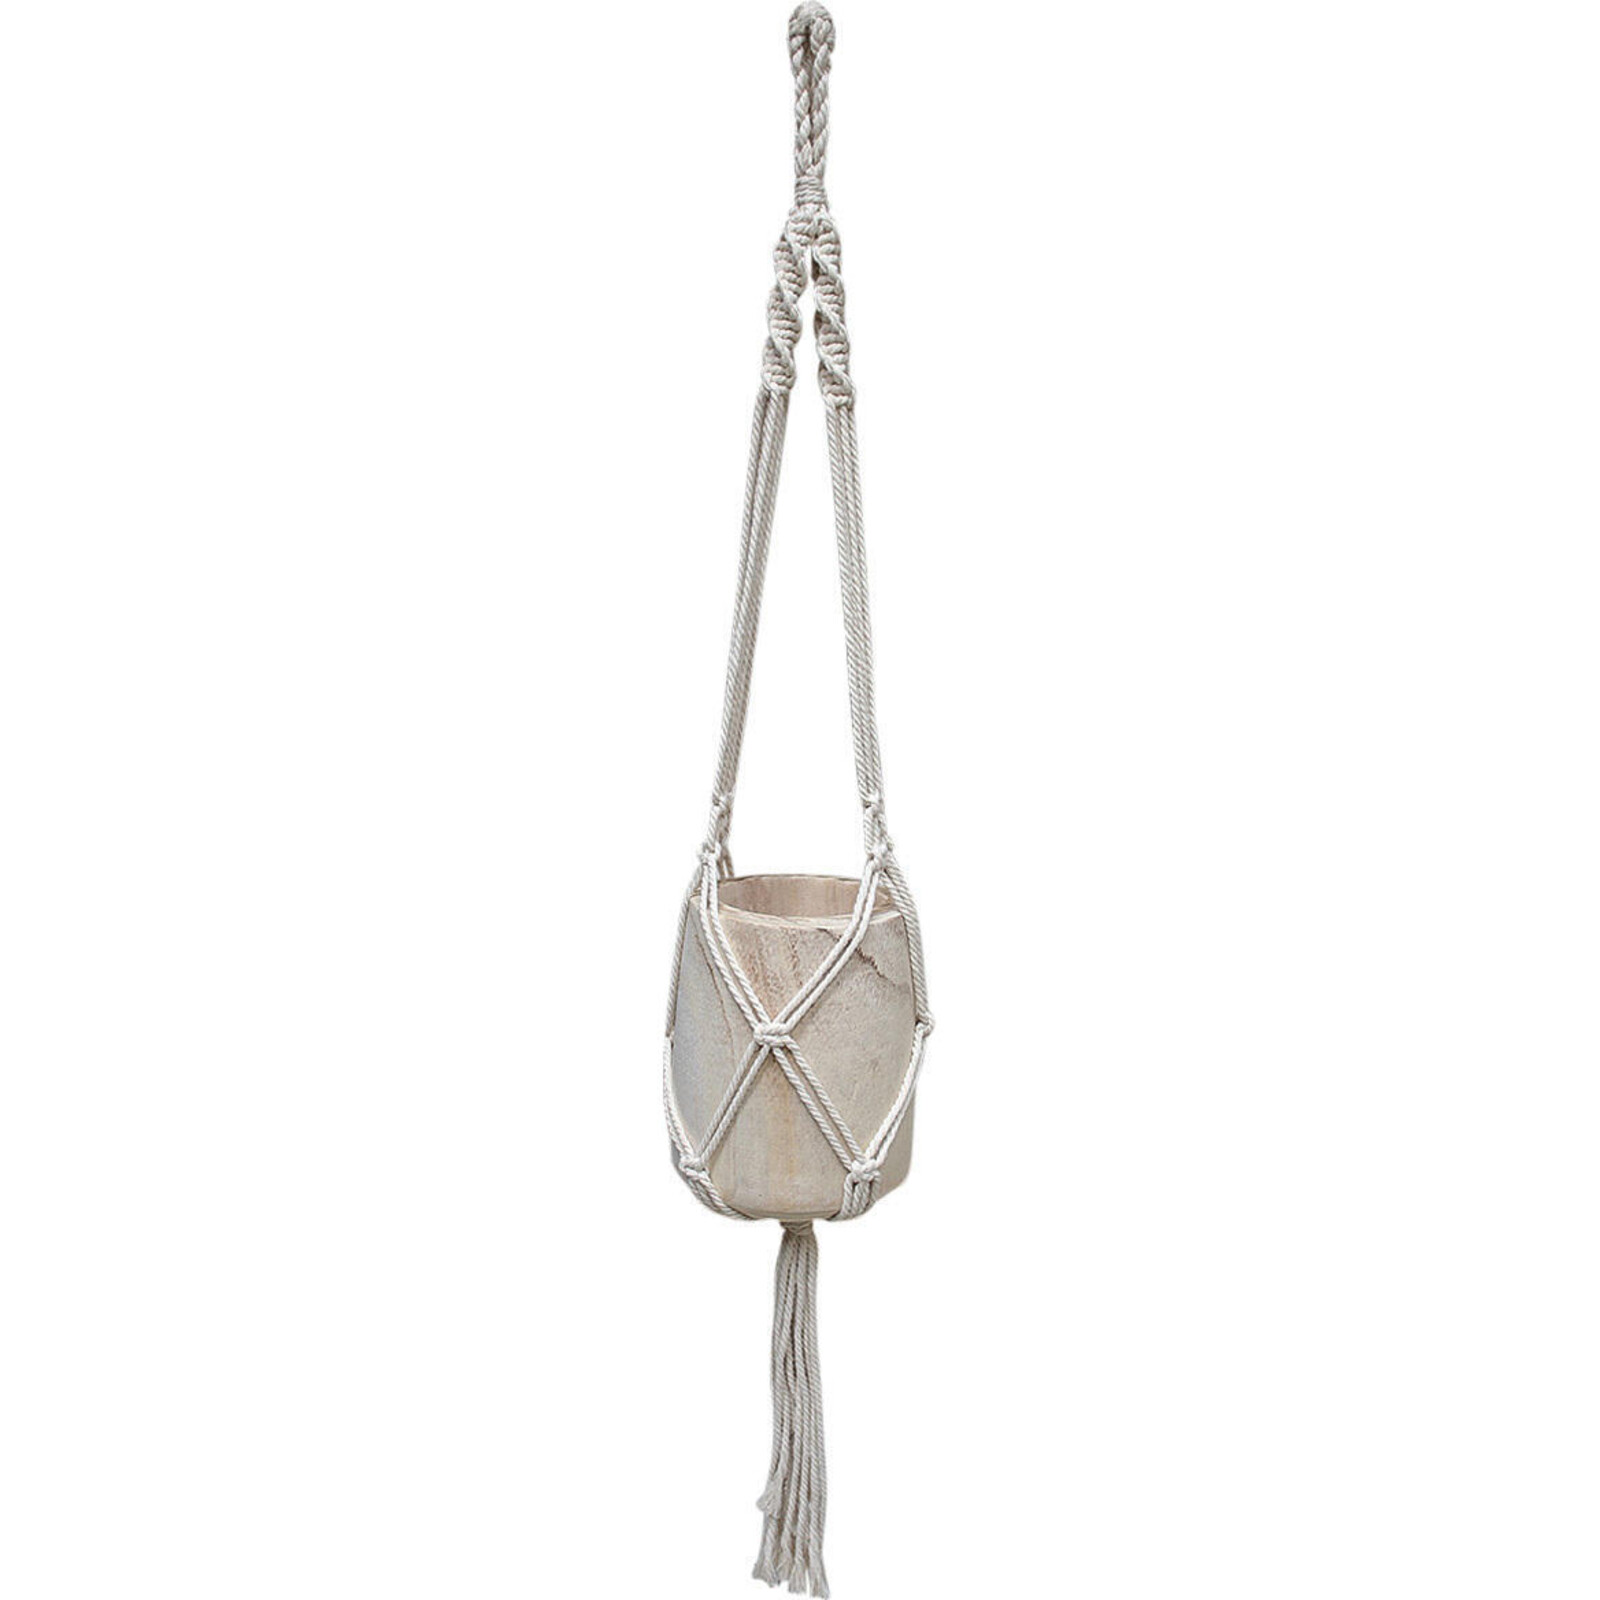 Hanging Macrame Bowl Knotted